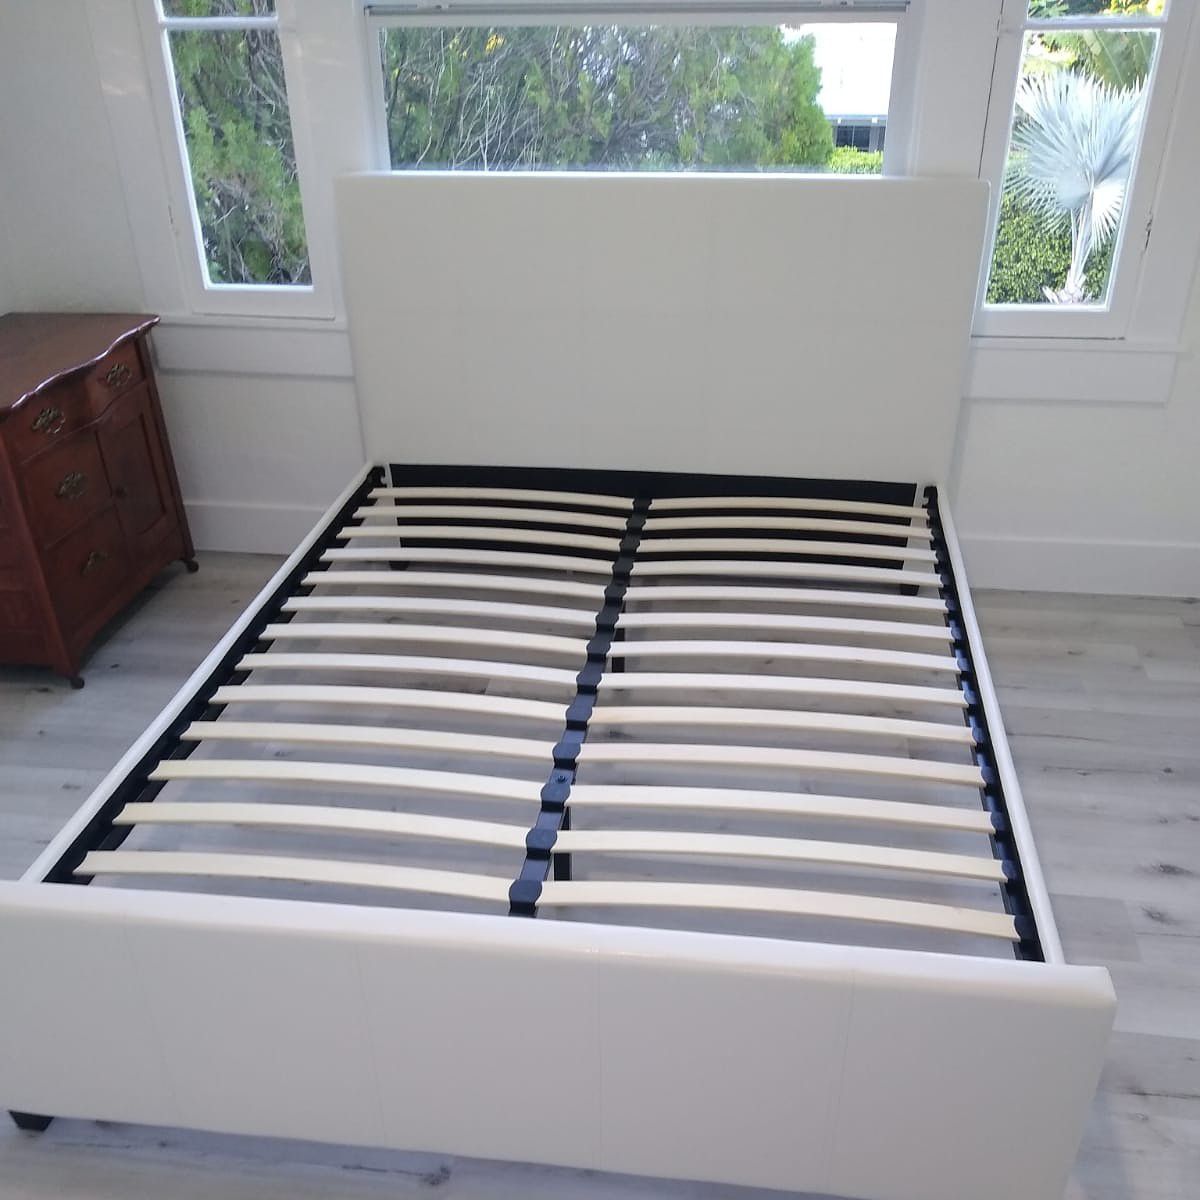 Queen size bed frame new in the box. Free delivery and free set up